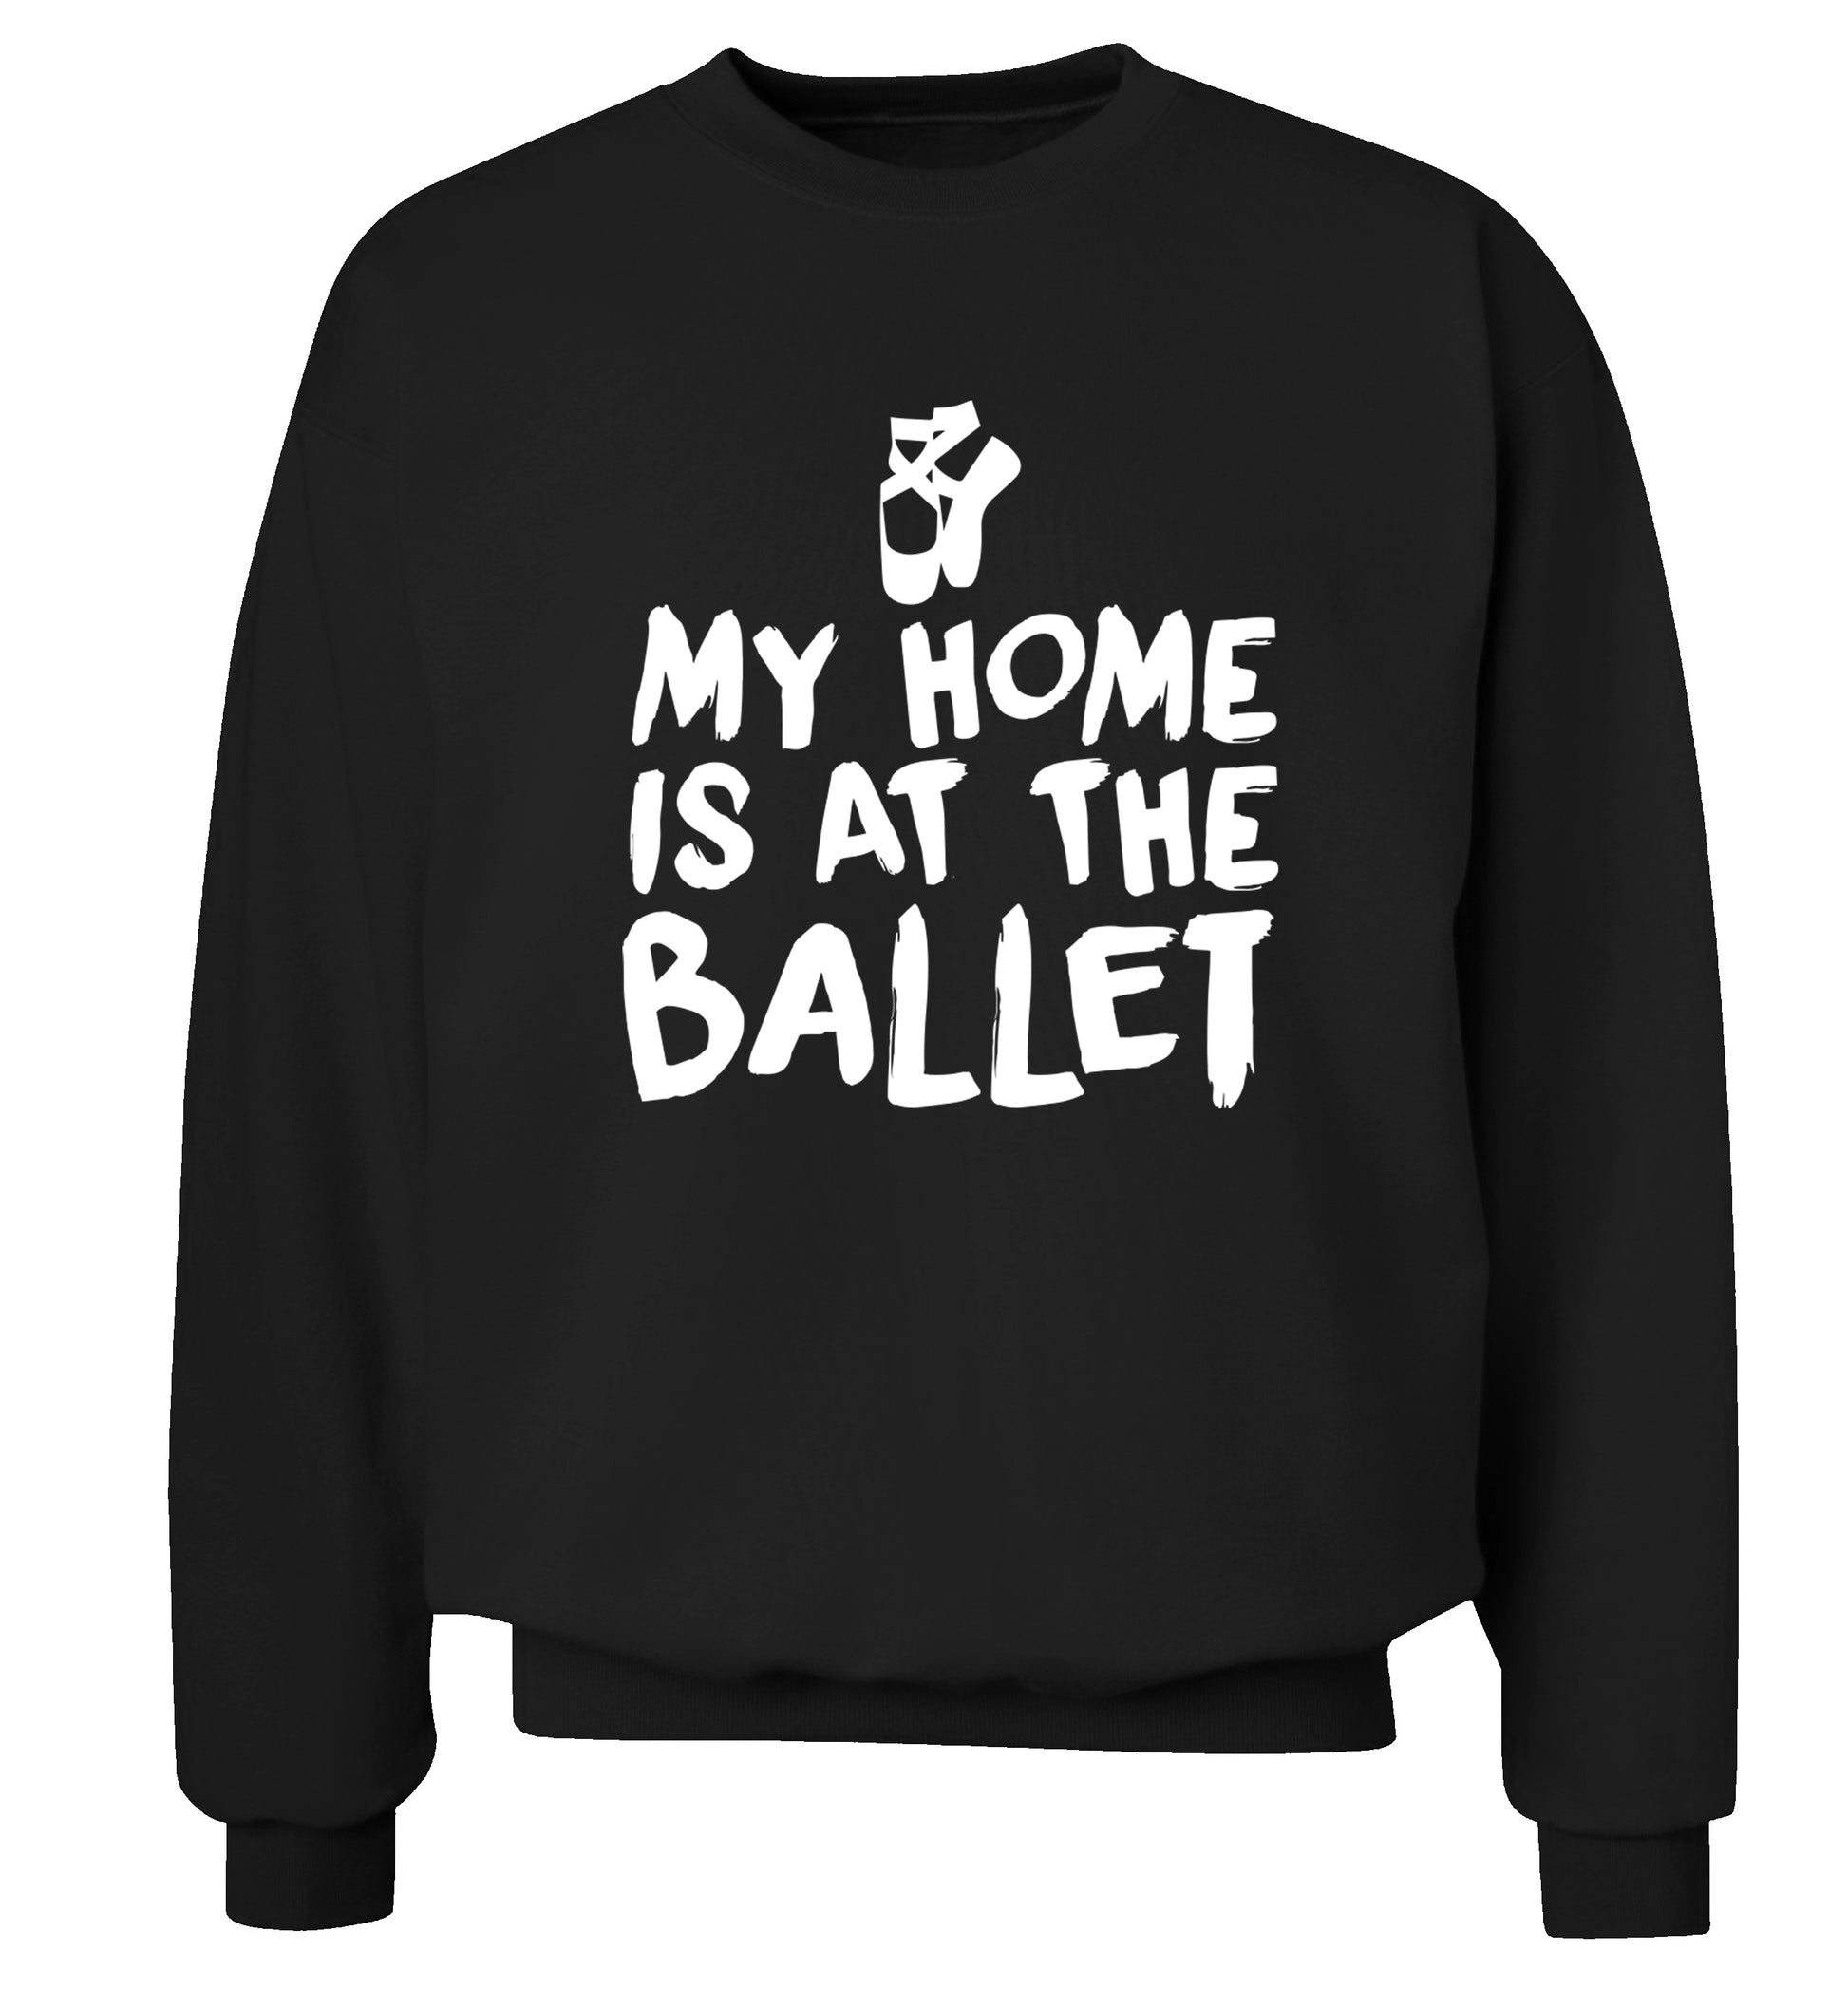 My home is at the dance studio Adult's unisex black Sweater 2XL